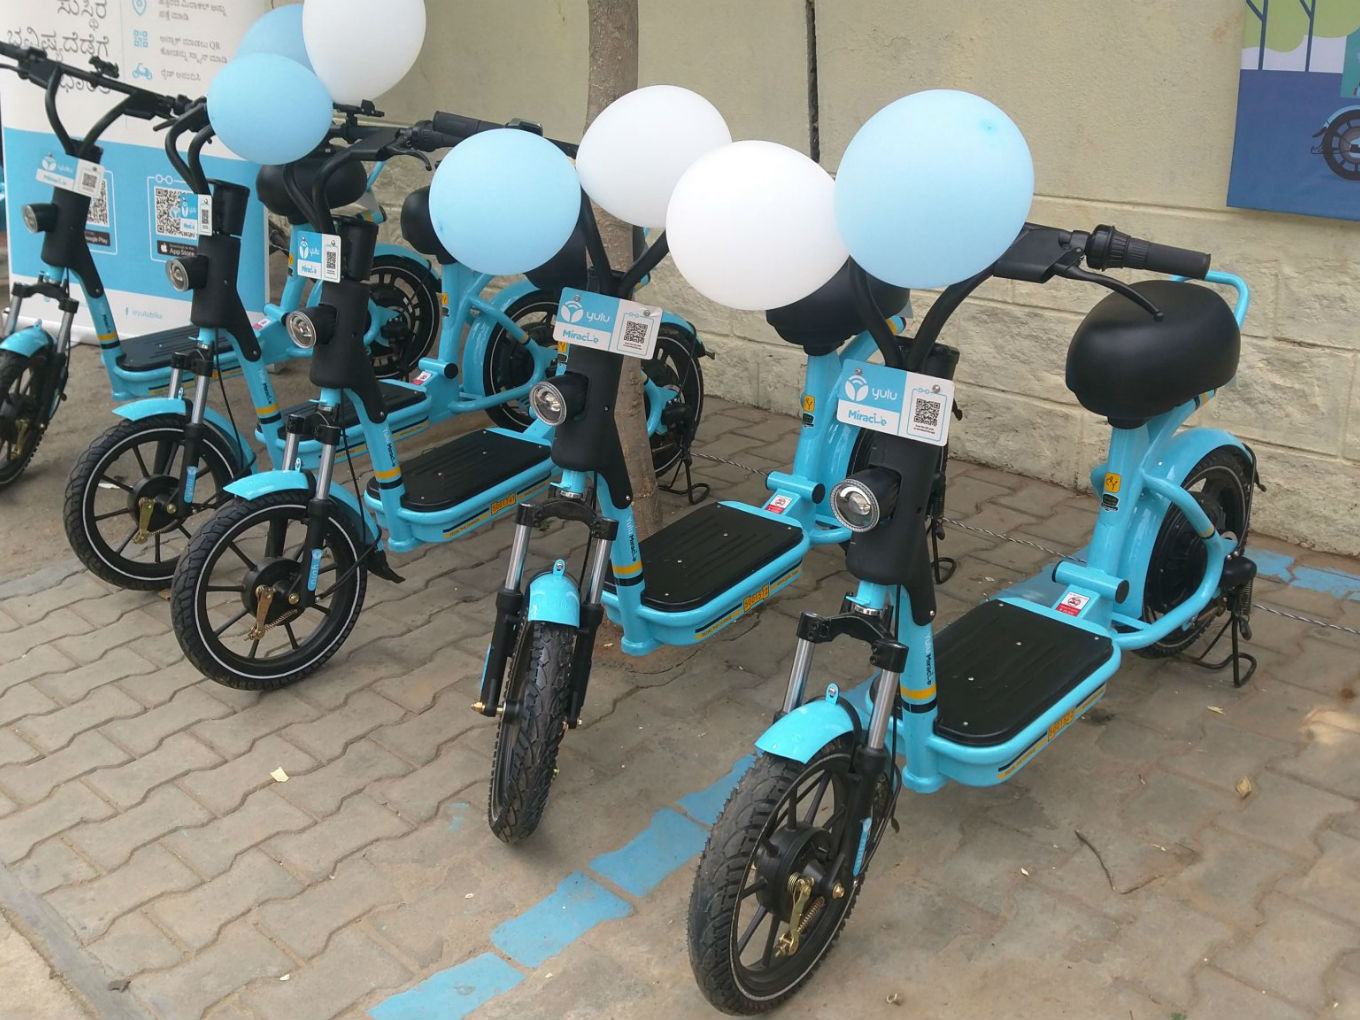 Yulu Brings Miracle Escooters To Electronic City To Solve Traffic Congestion Woes